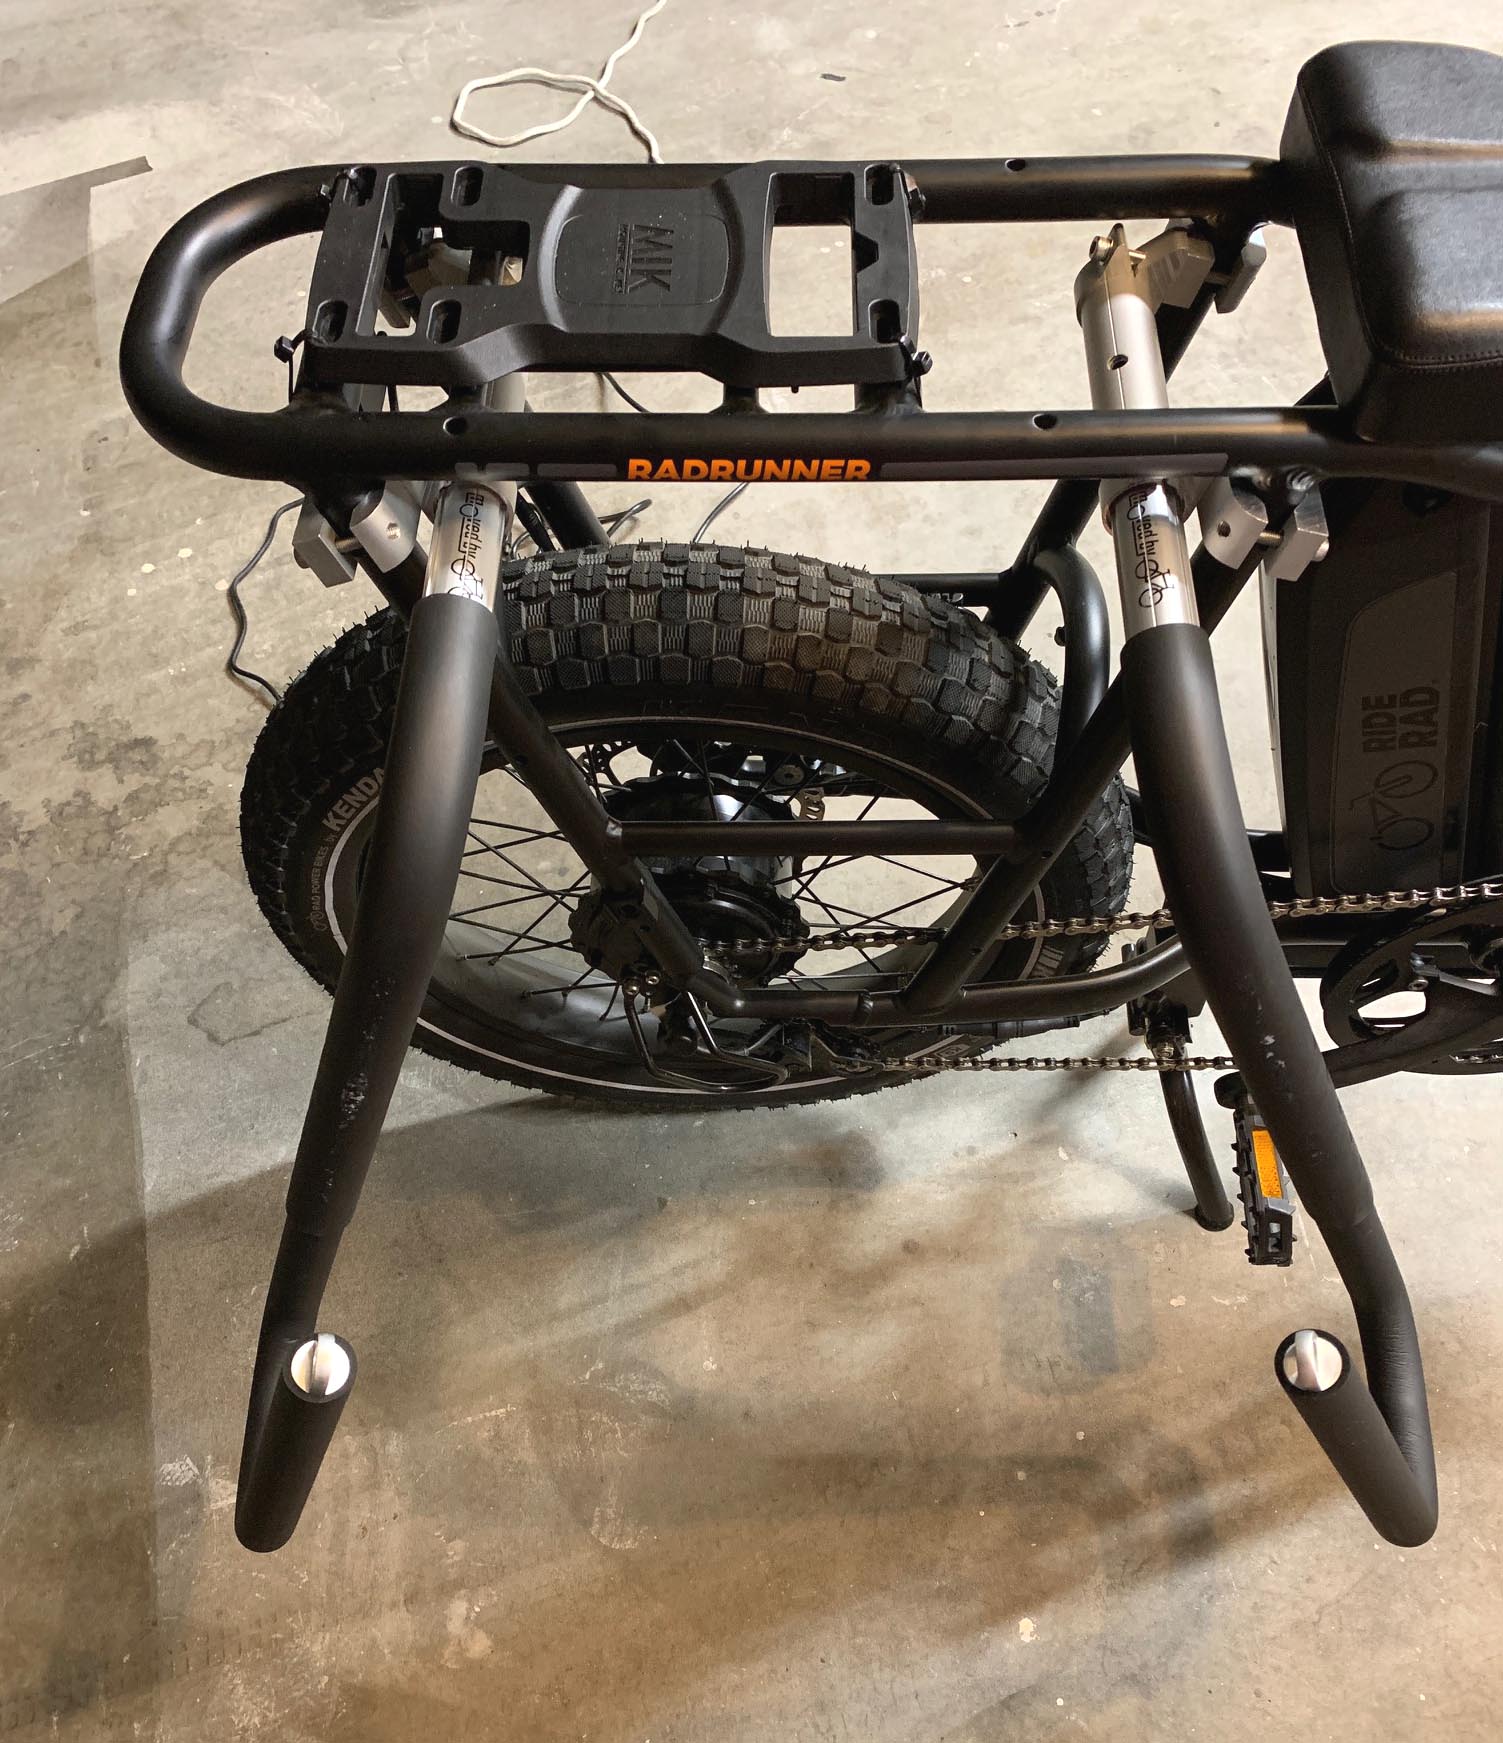 MBB Moped Racks by Moved By Bikes (MBB)